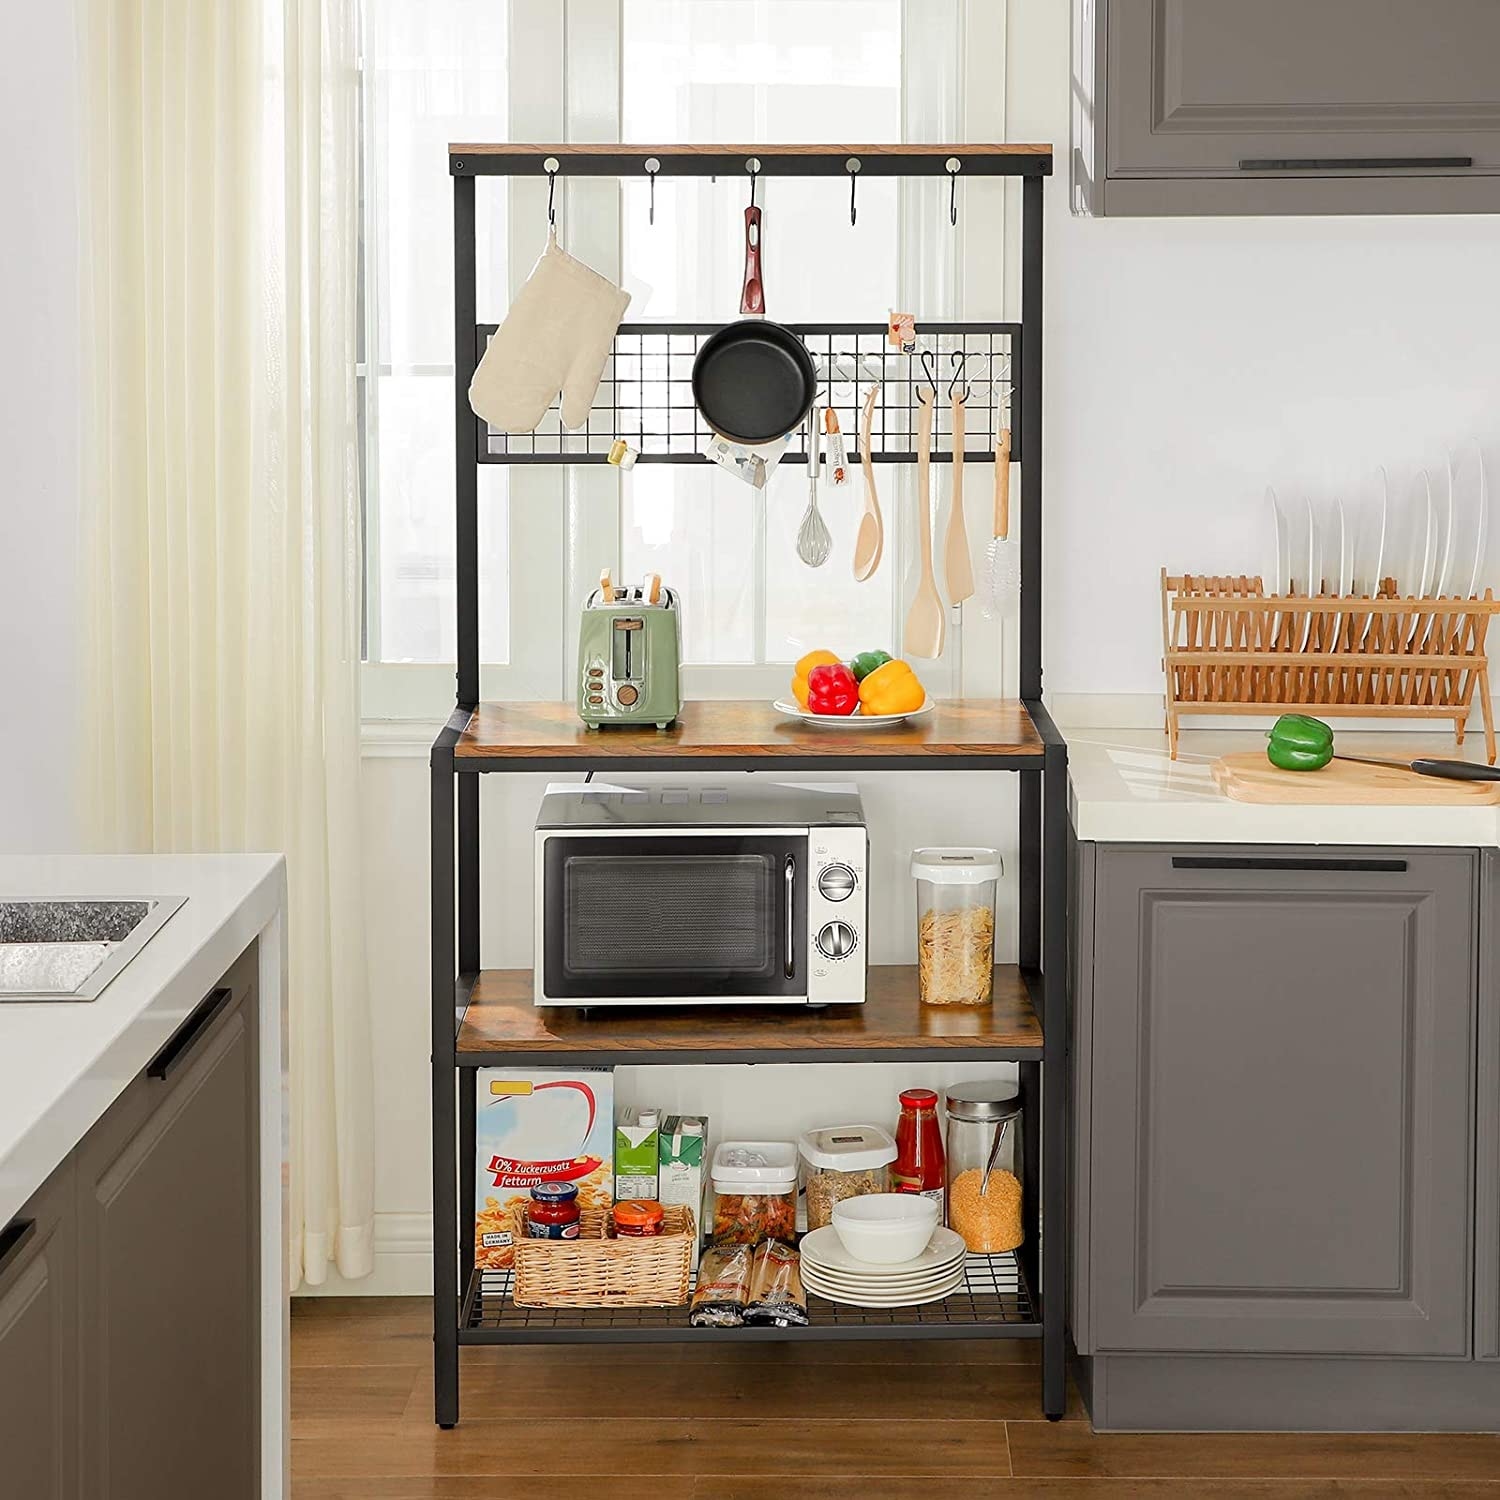 IRIS 67.72 in. Brown 4-shelf Baker's Rack with Storage Adjustable Shelves,  Coffee Station, Small Closet Organizer 590063 - The Home Depot